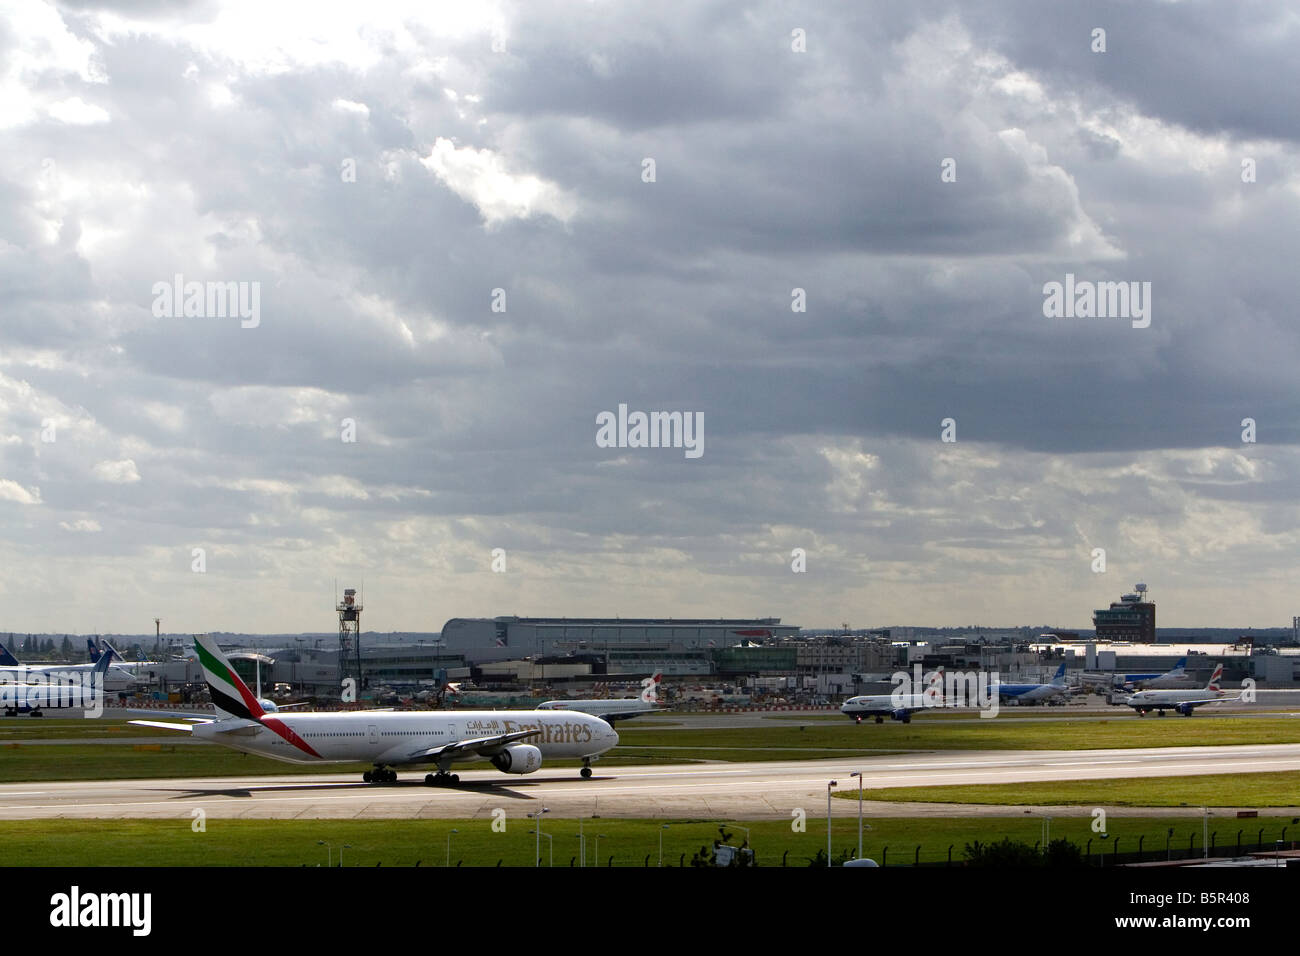 Emirates Boeing 777 airliner on the runway at London Heathrow Airport England United Kingdom on a cloudy day Stock Photo